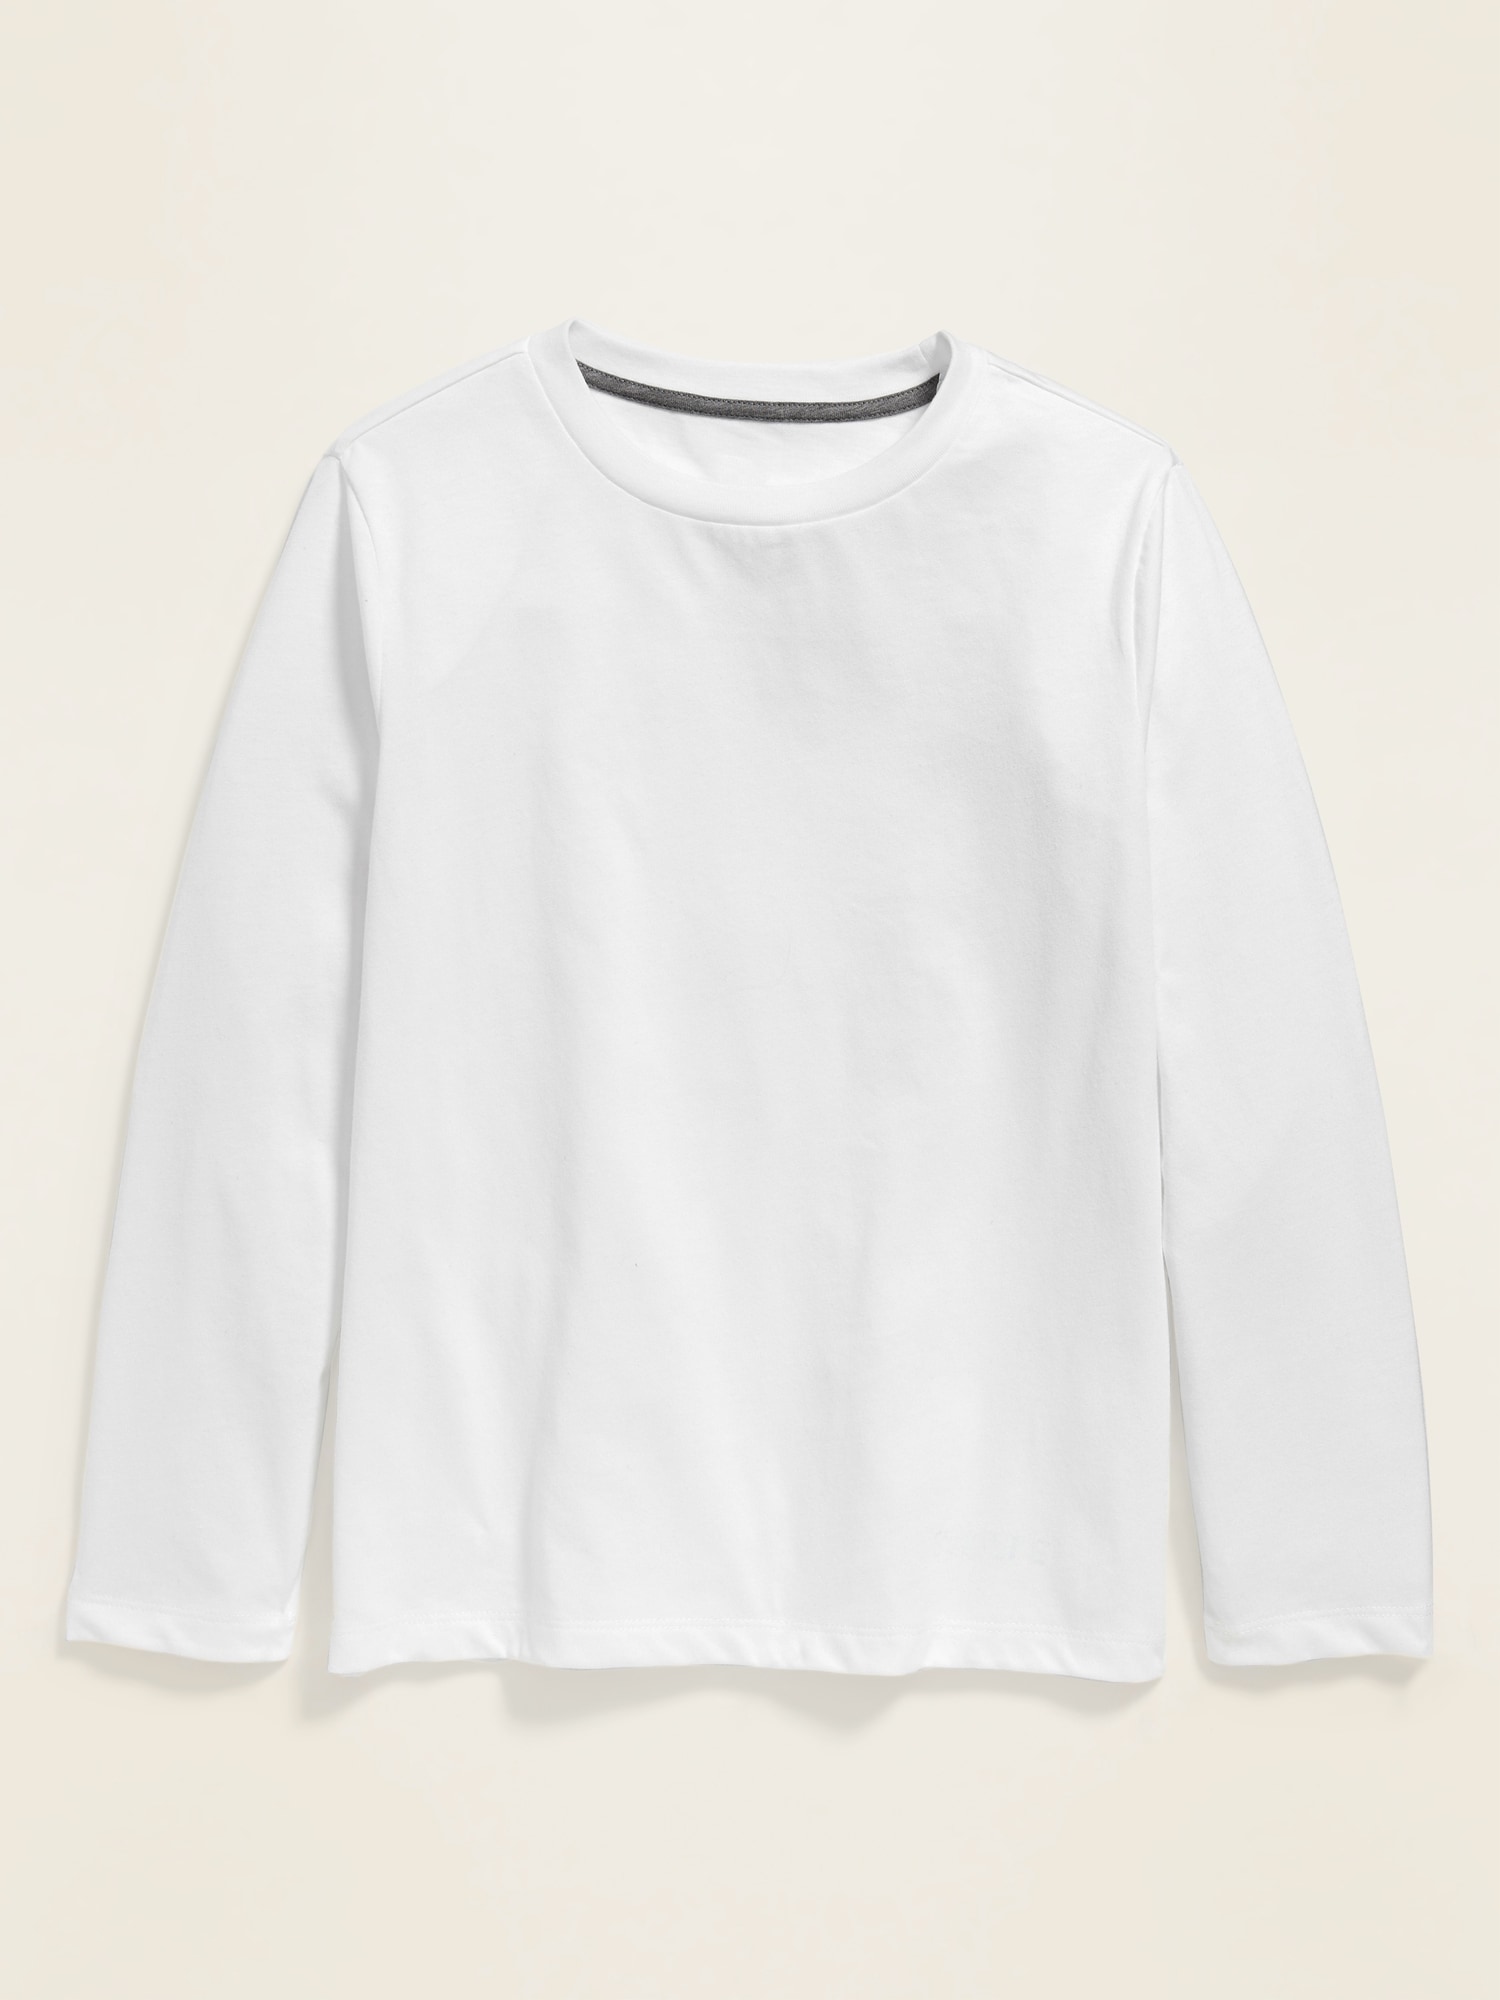 Long-Sleeve Softest T-Shirt for Boys | Old Navy